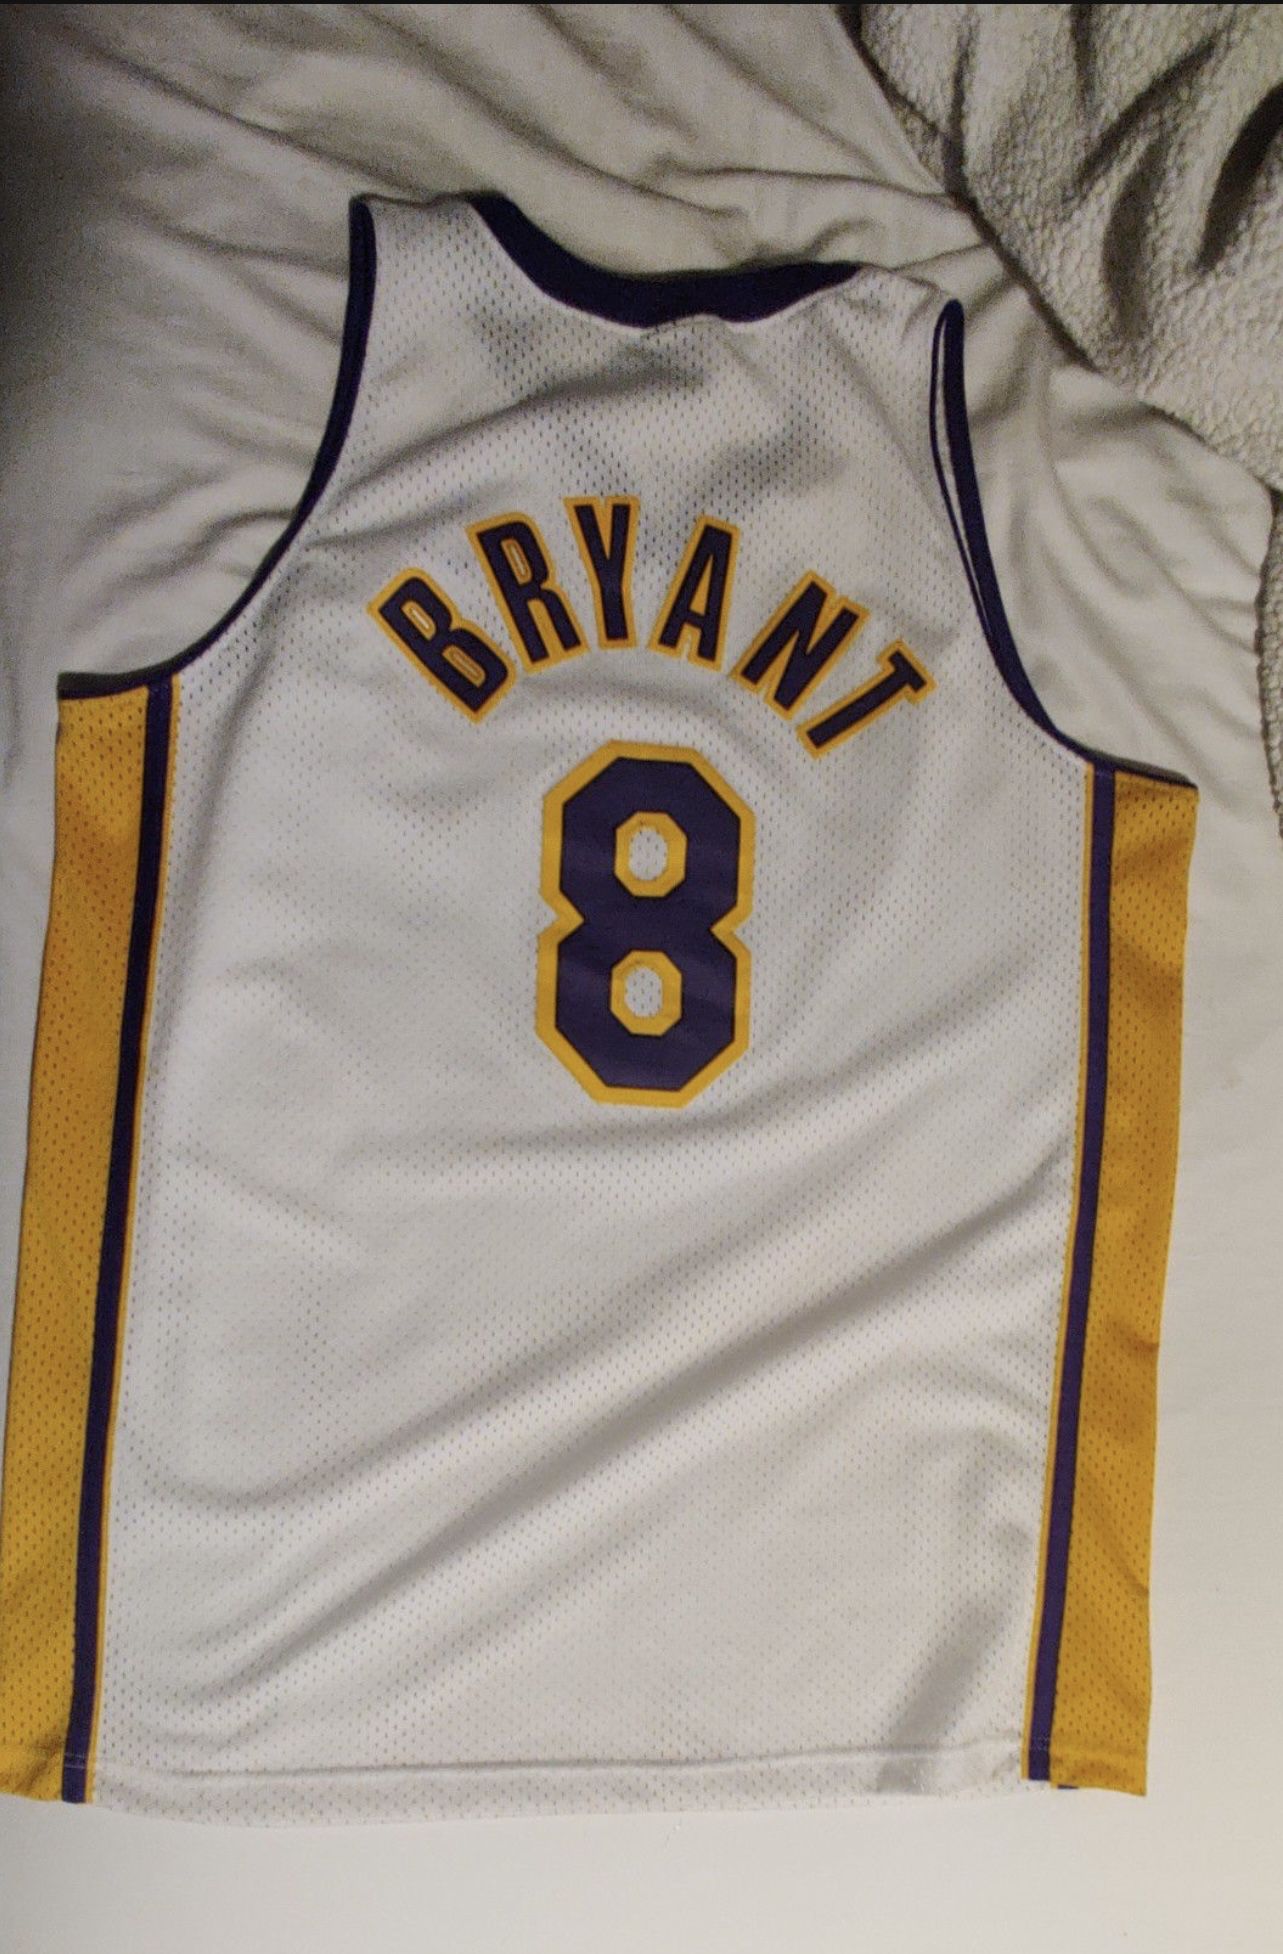 Kobe Bryant Jersey #8 for Sale in Los Angeles, CA - OfferUp